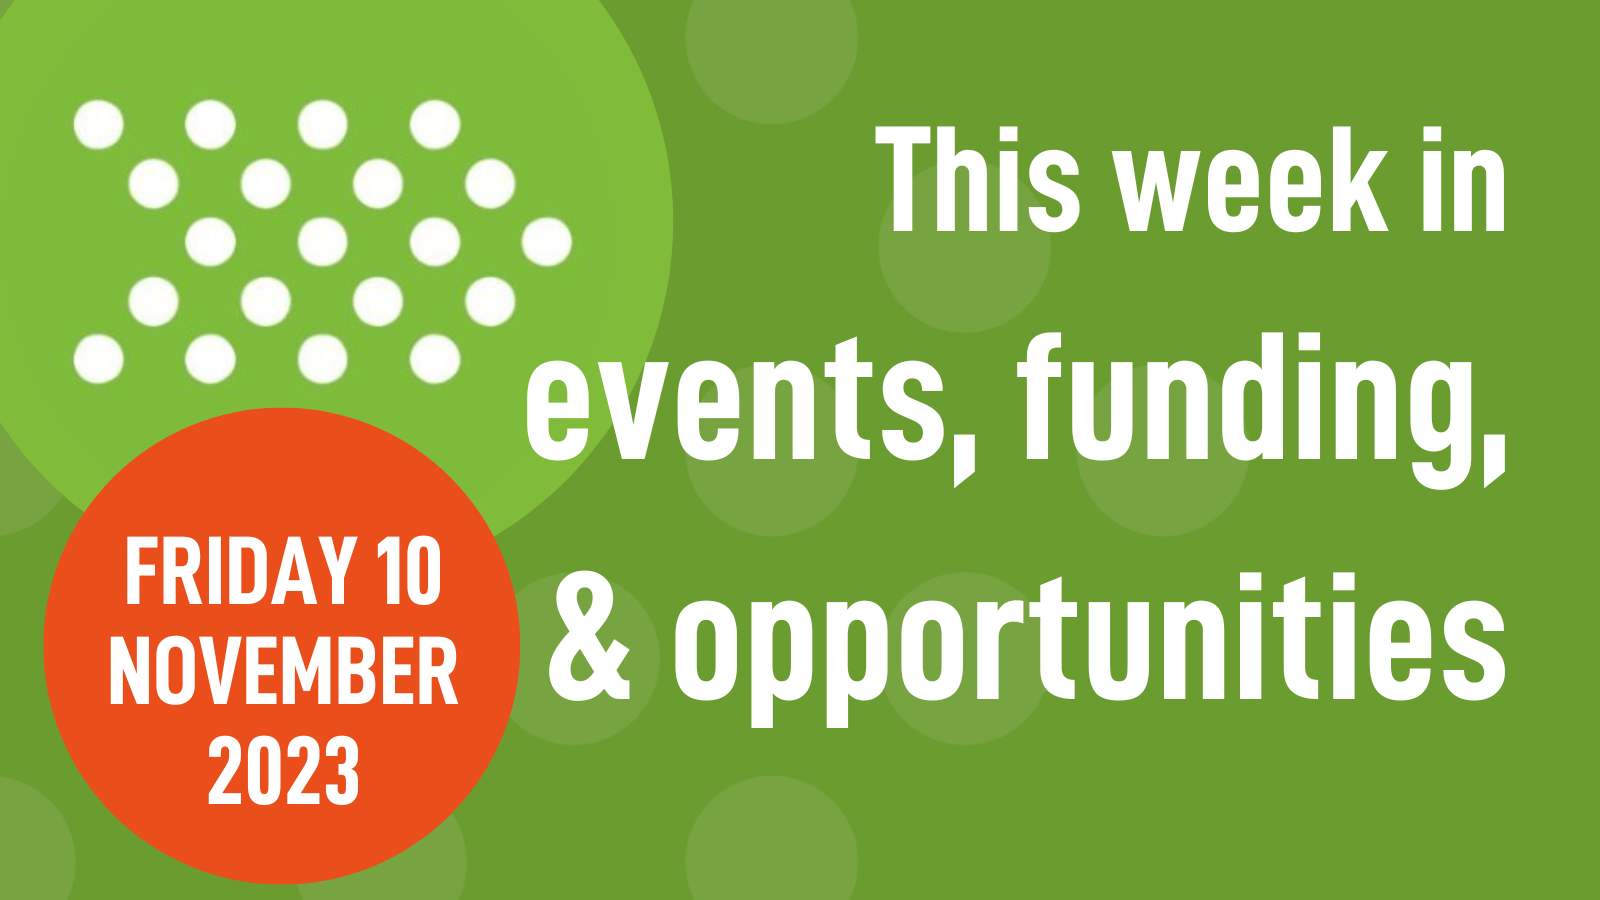 Weekly roundup 10/11/23: events, funding, & opportunities in mental health research